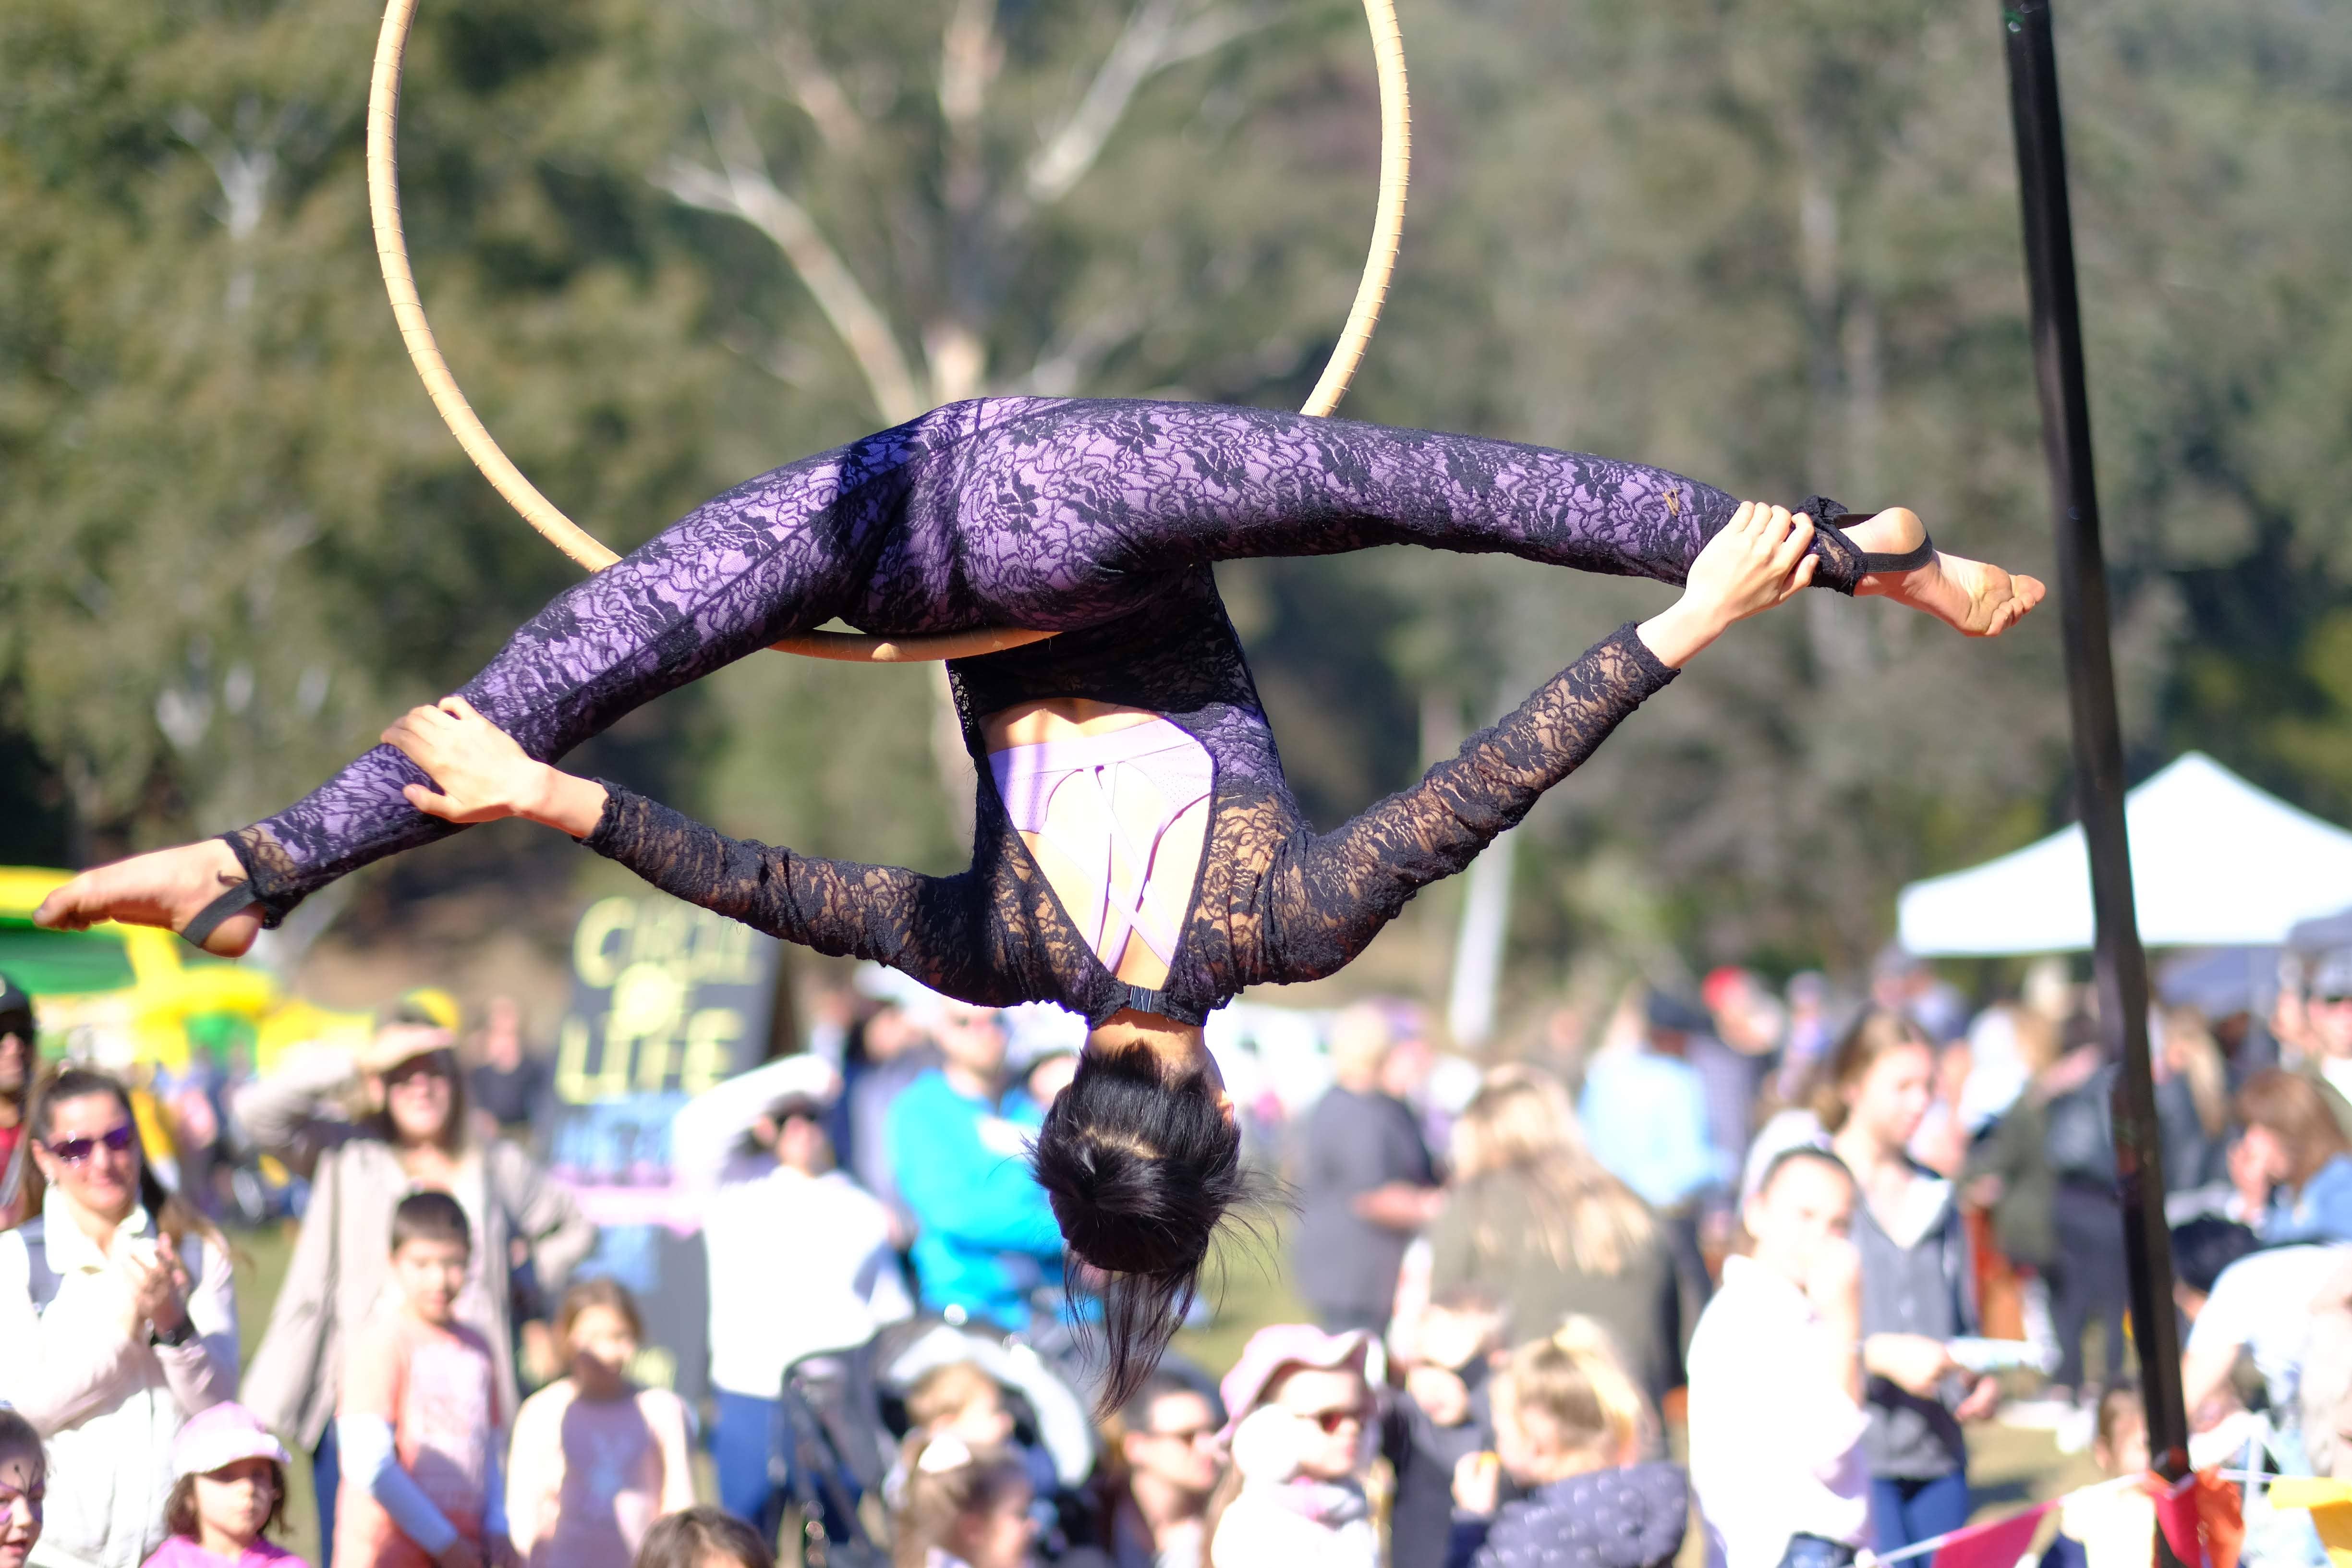 outdoor aerial performances on Silks and trapeze Central Coast